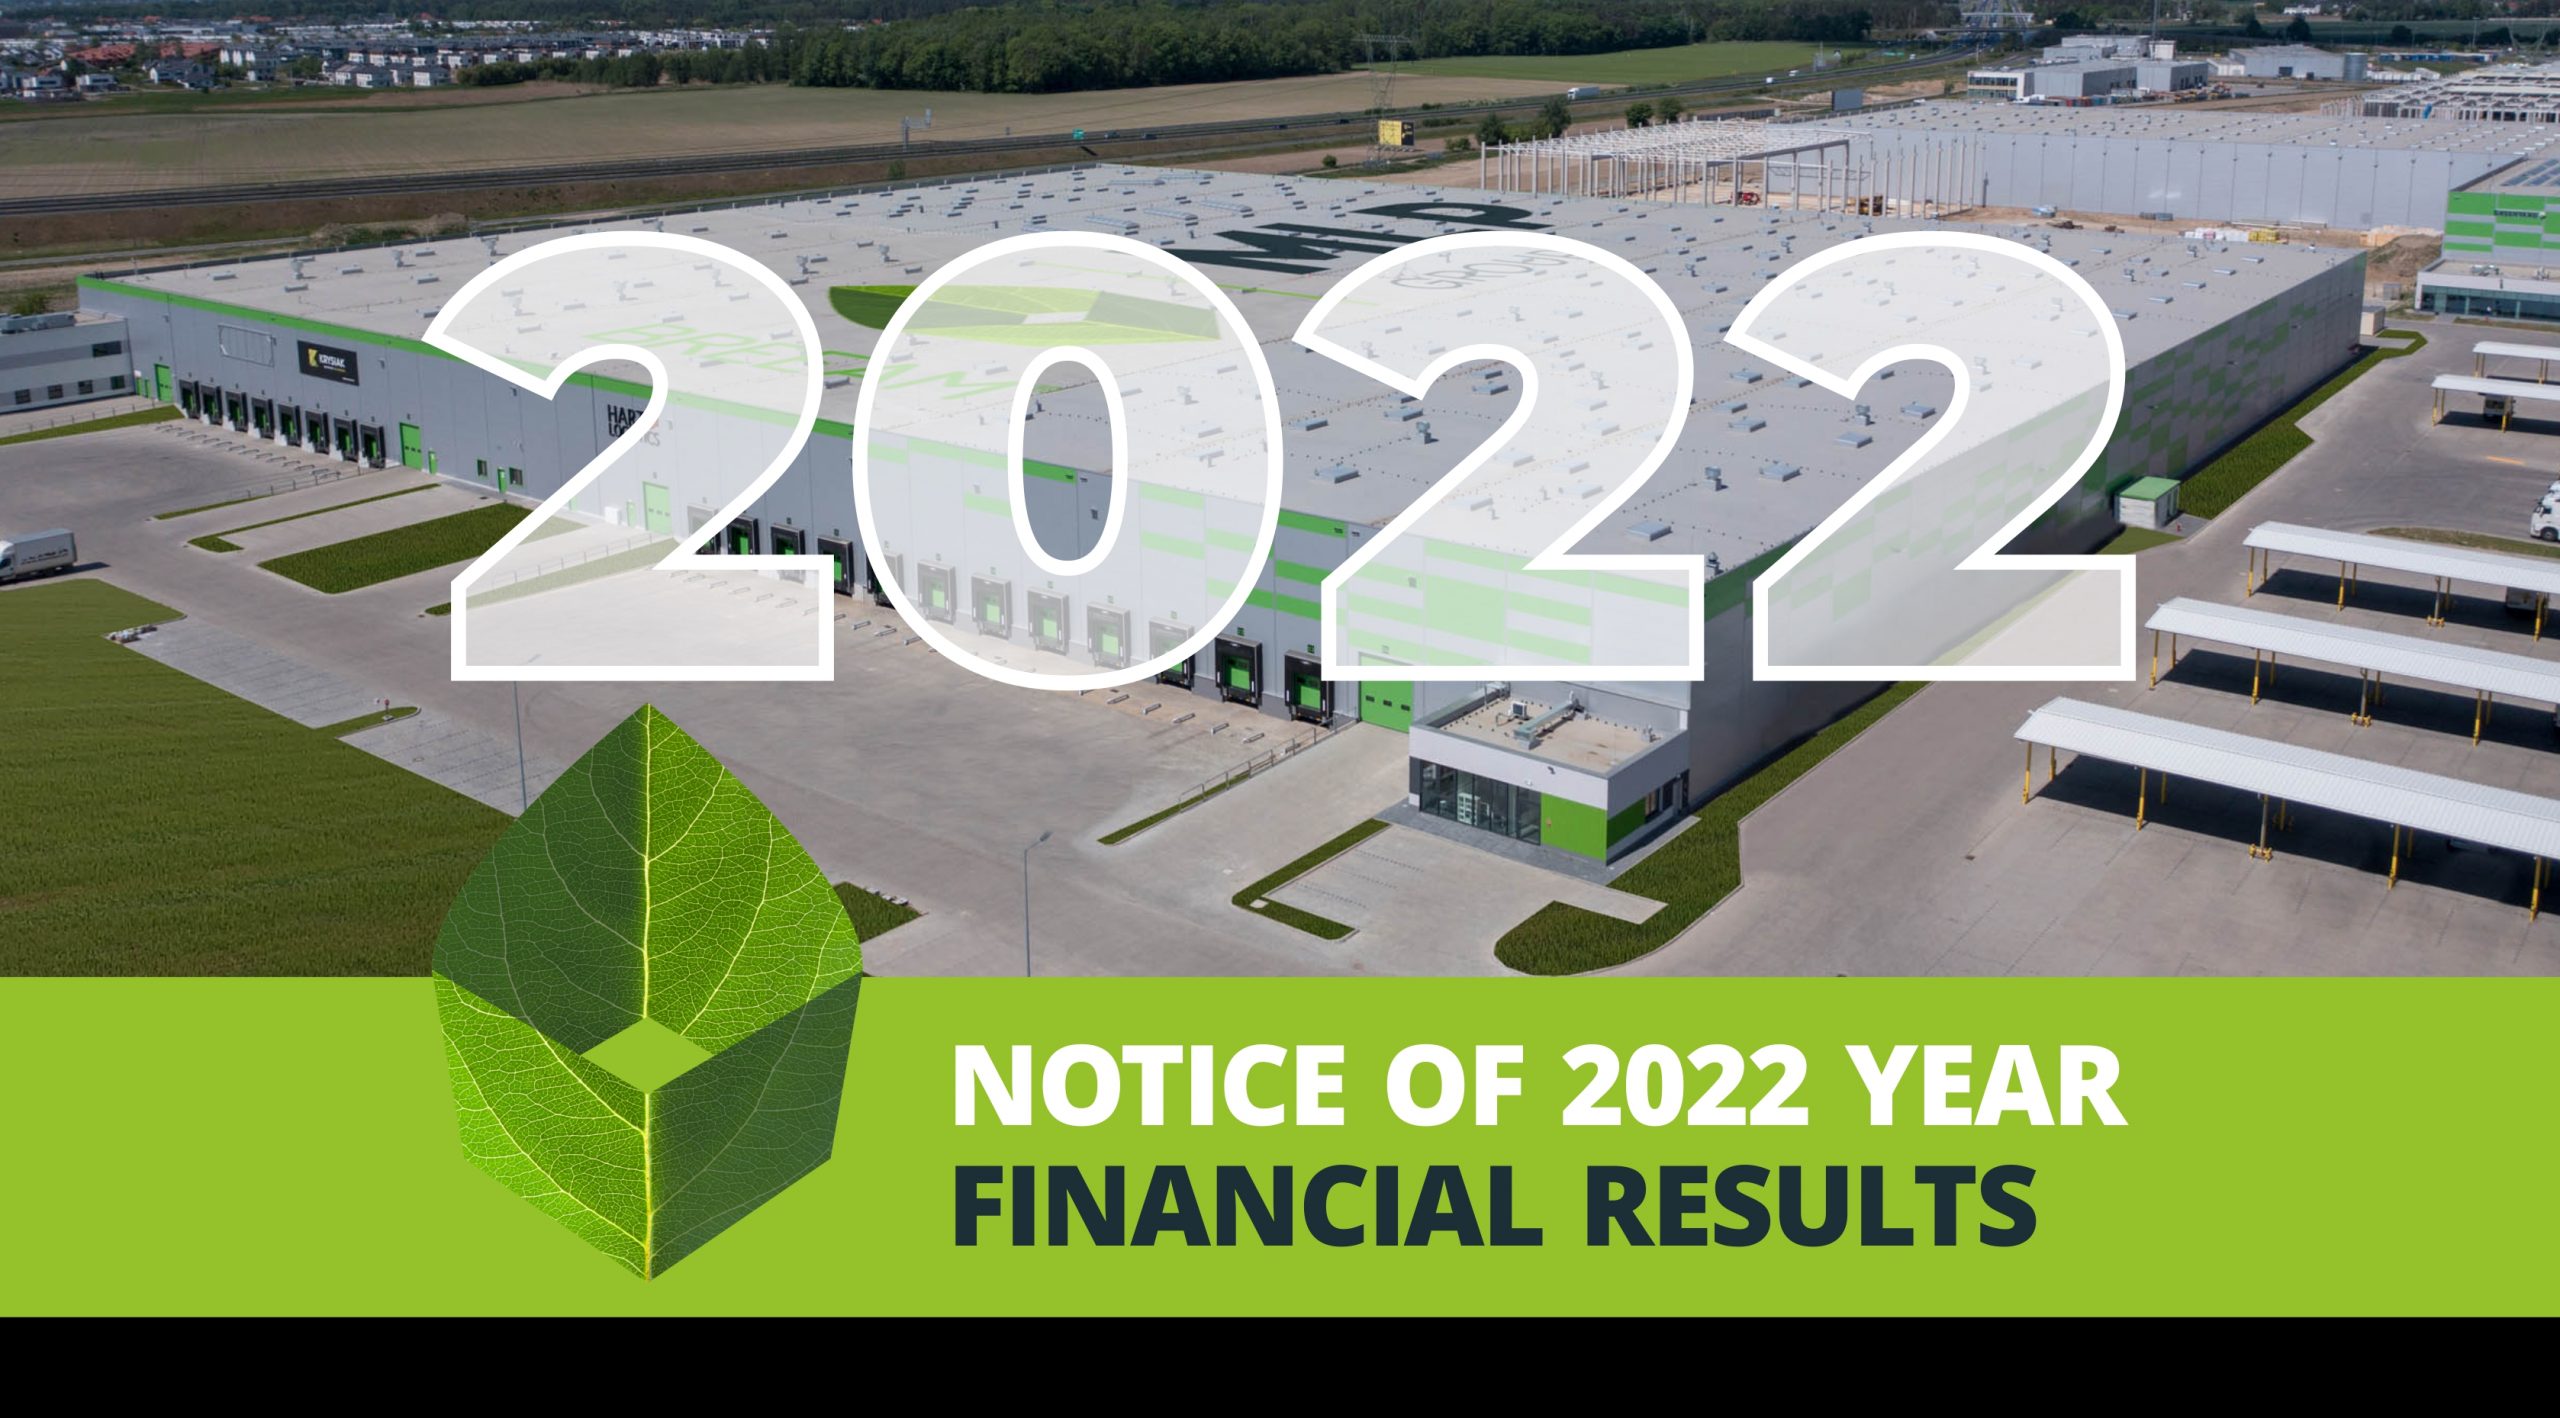 MLP GROUP S.A. NOTICE OF 2022 YEAR FINANCIAL RESULTS